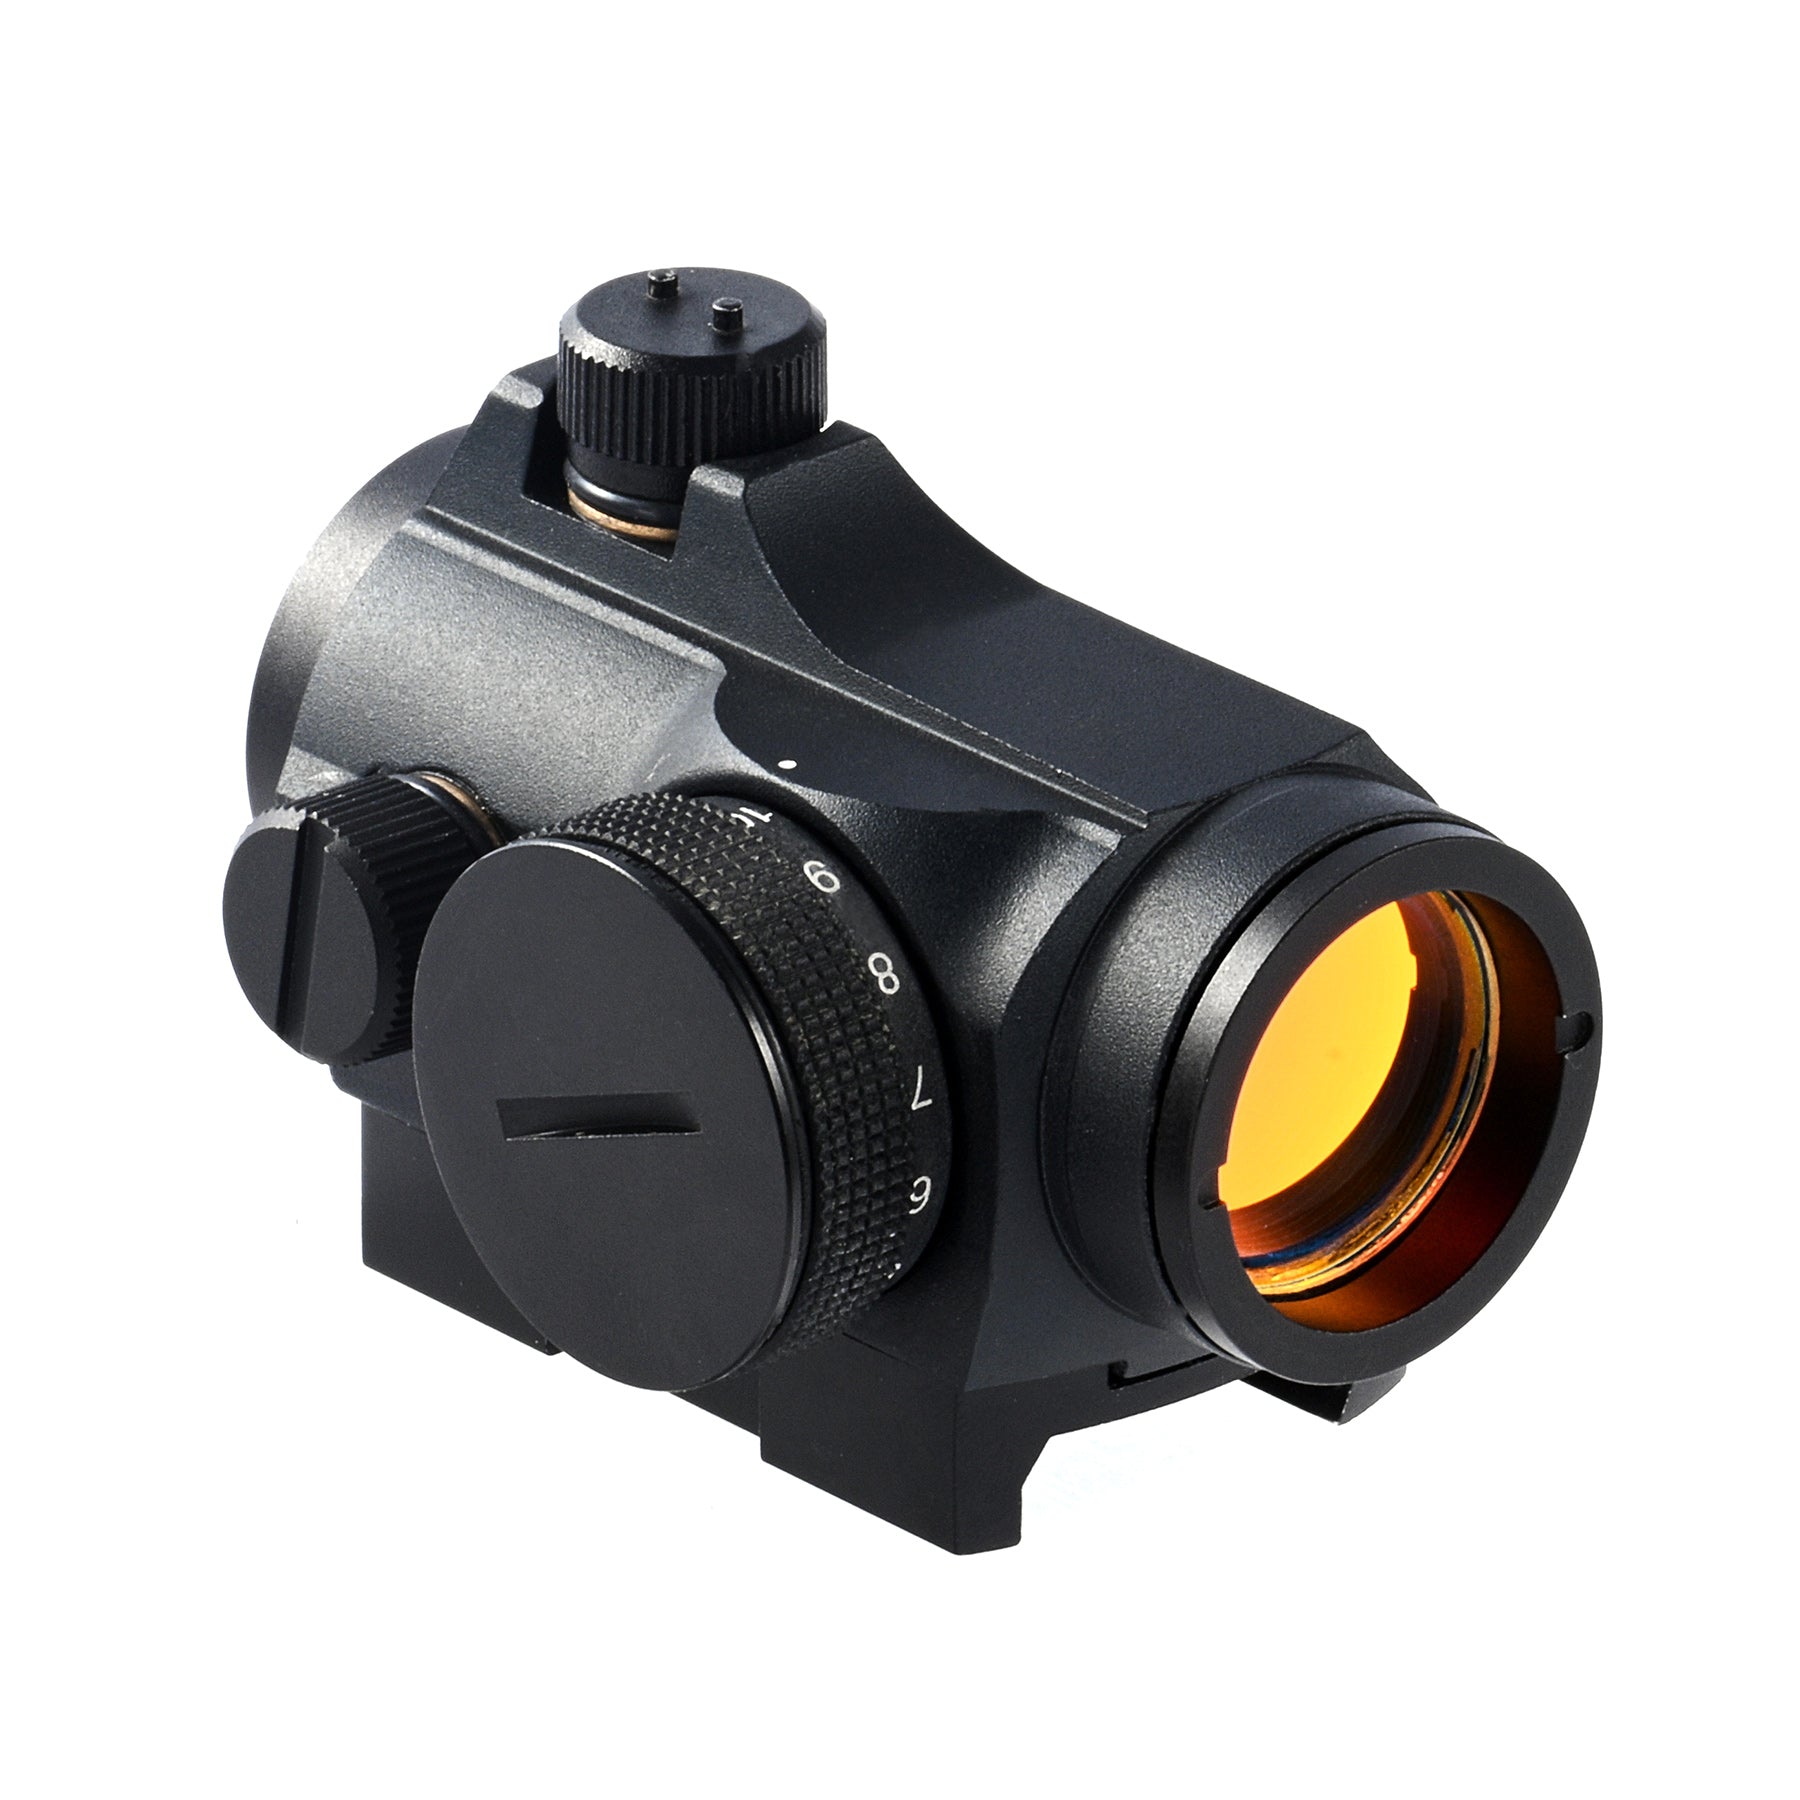 1x22 Red Dot Sight, Micro Reflex Sight 3 MOA Rifle Scope with Fogproof 22mm Objective Lens for Standard Picatinny or Weaver Rail, Battery Included, Black